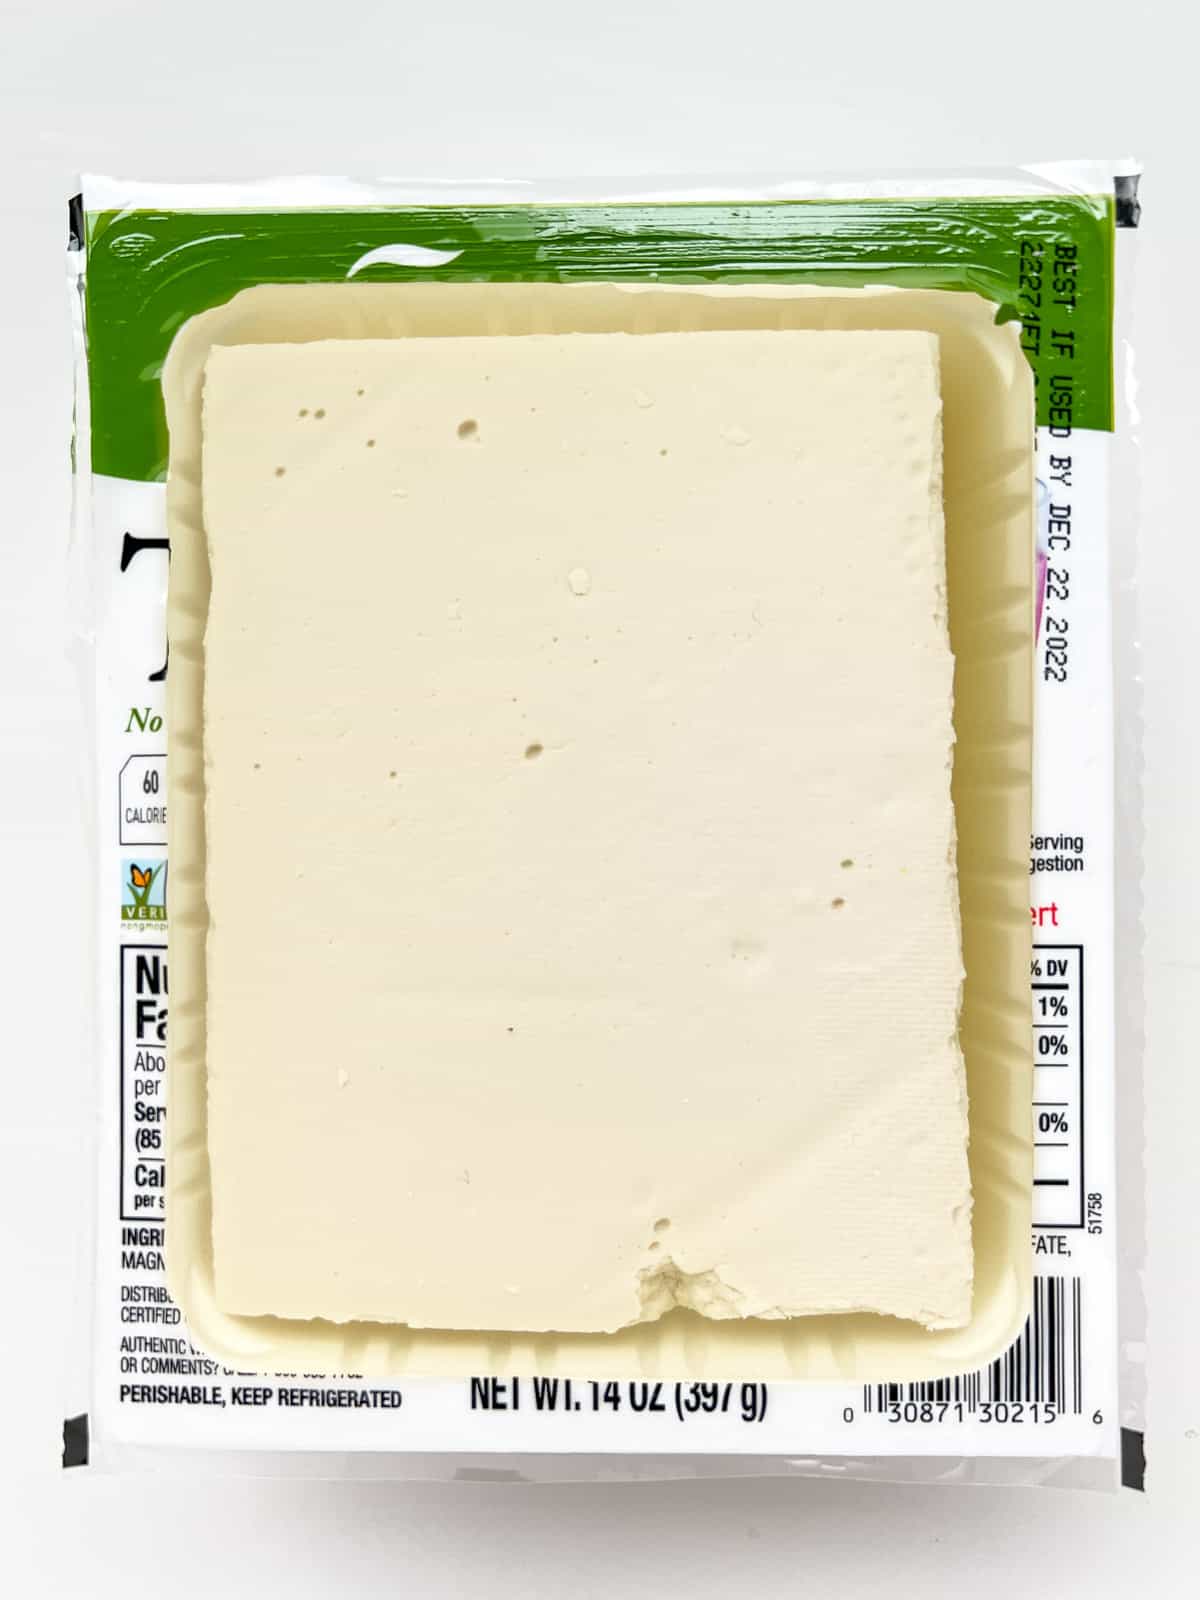 An image of tofu in its package with the lid removed.